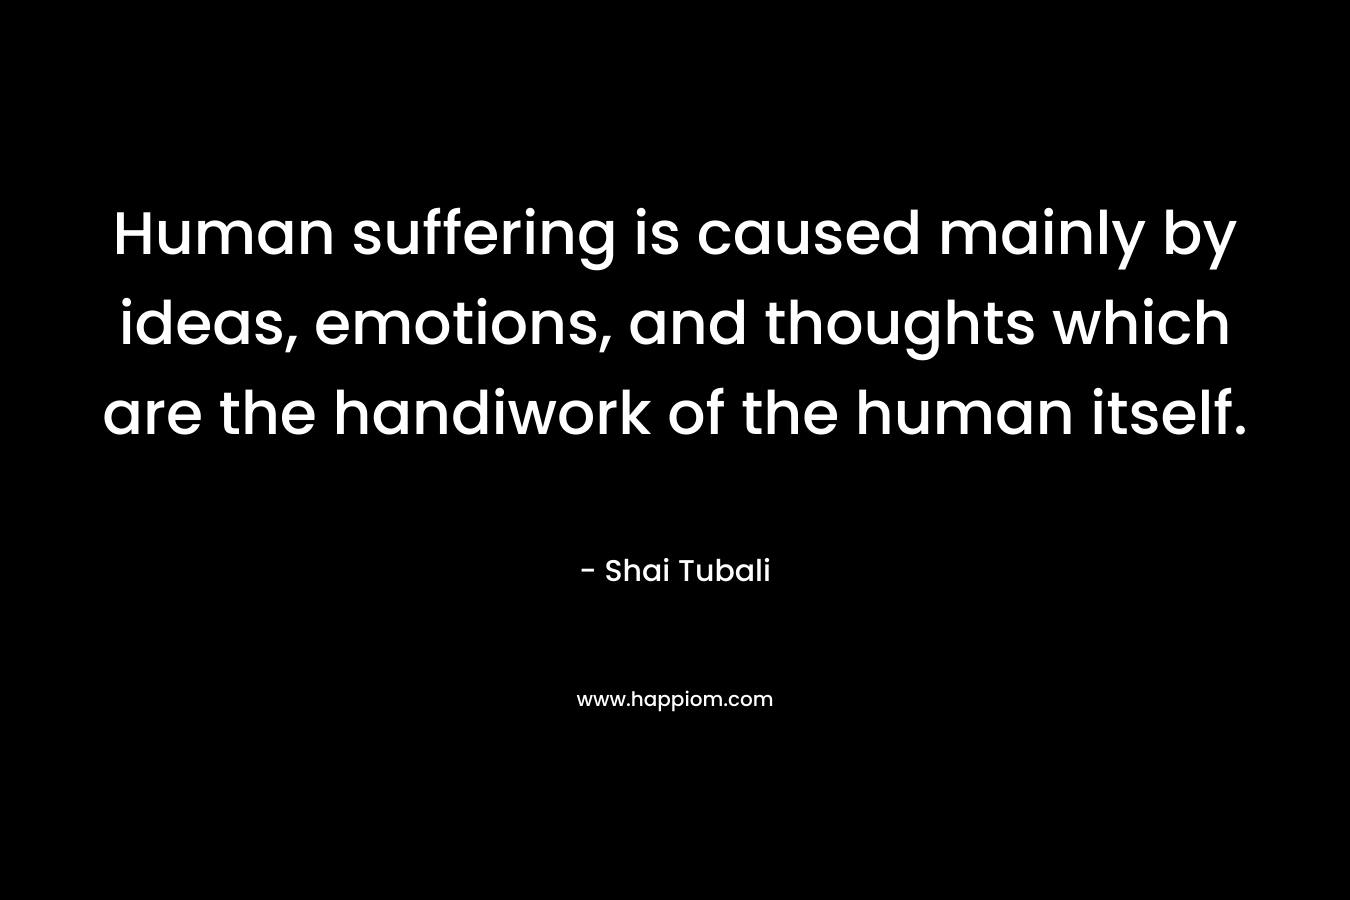 Human suffering is caused mainly by ideas, emotions, and thoughts which are the handiwork of the human itself.